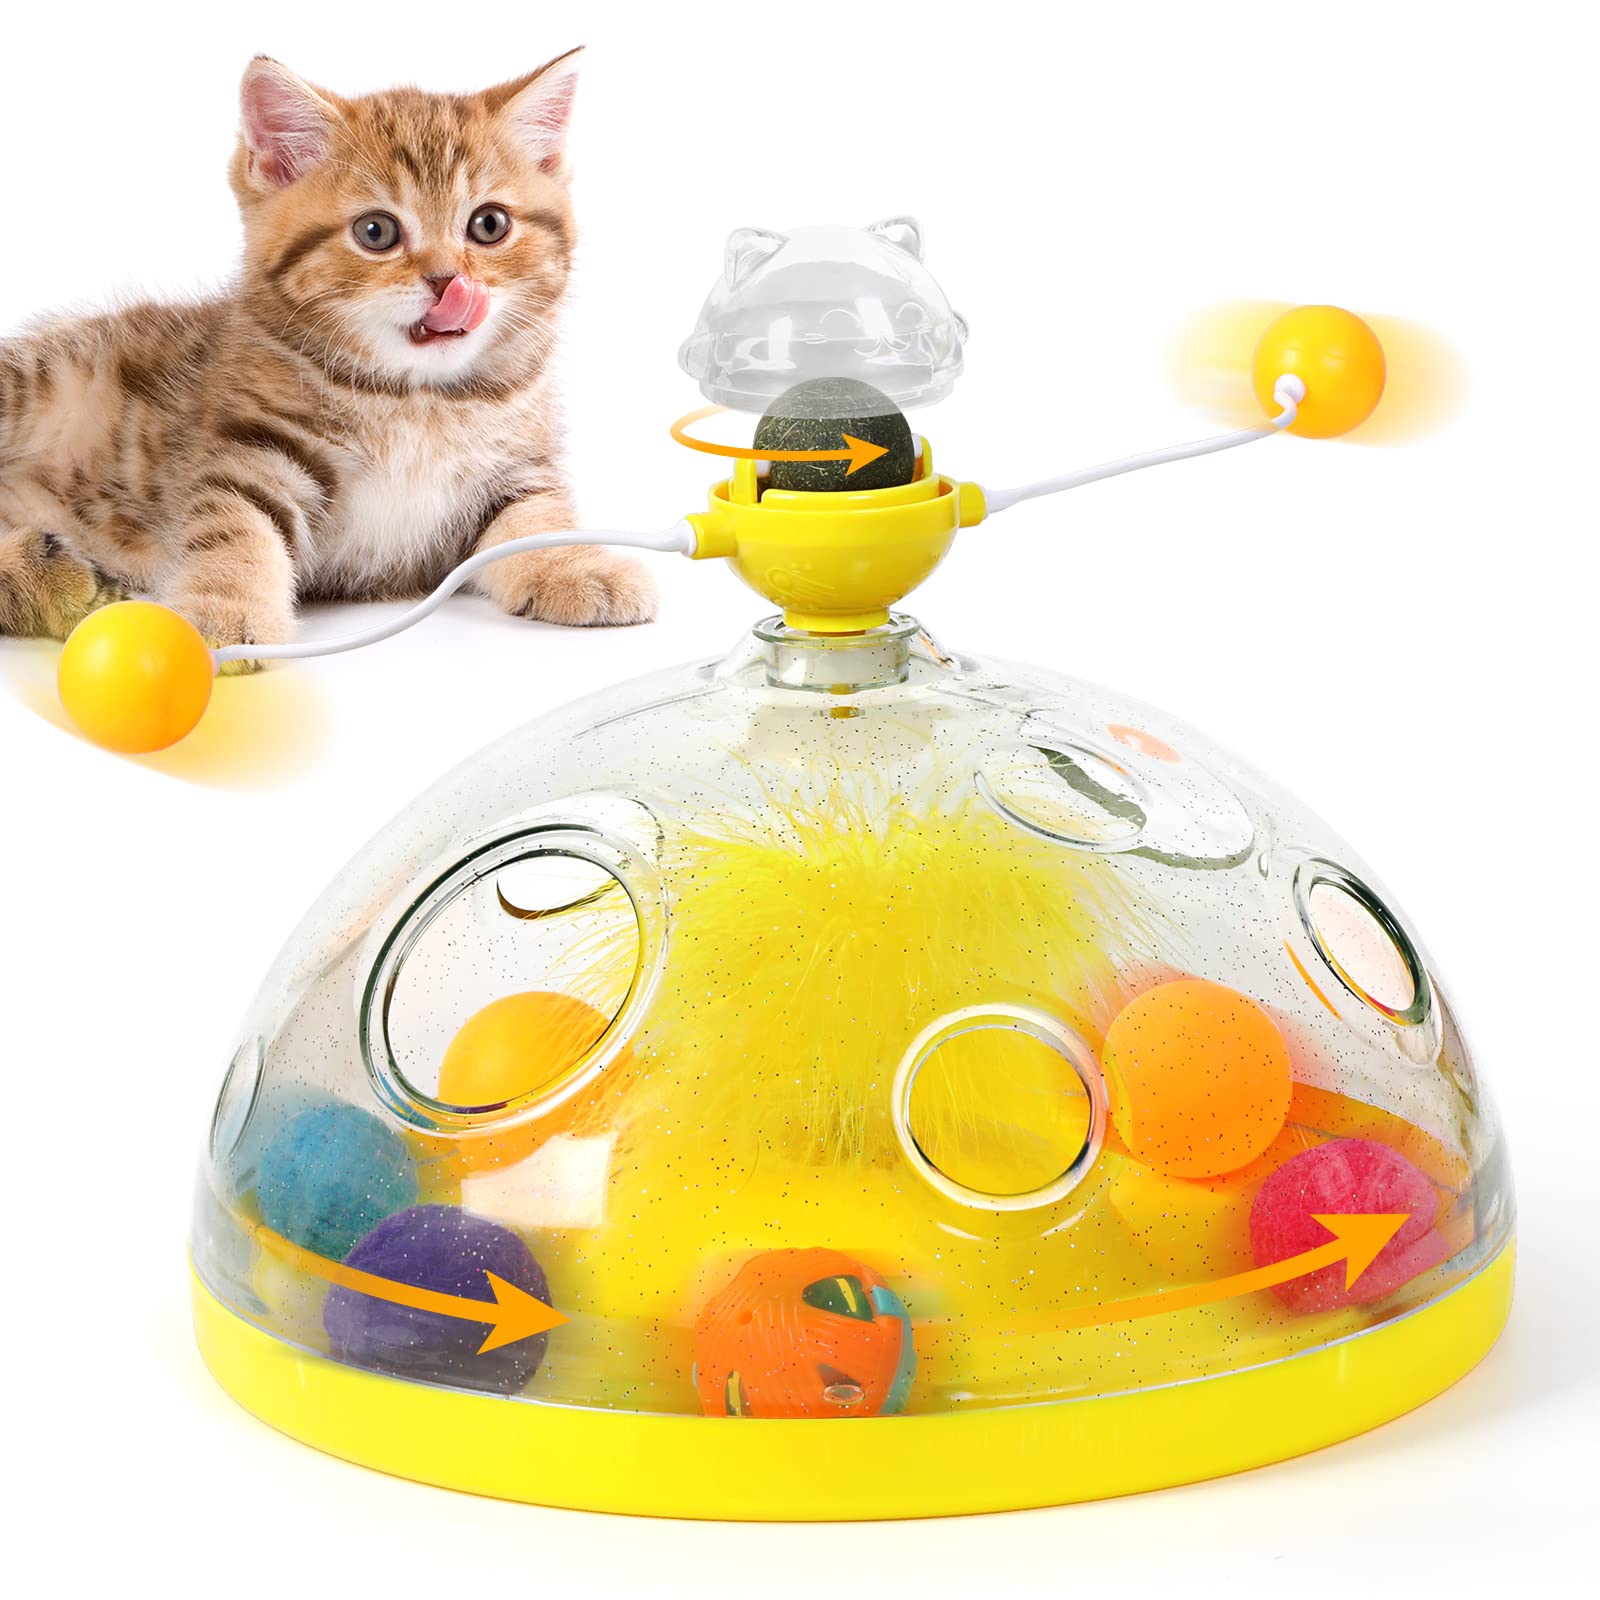 Puzzle Feeder Cat Toys for Indoor Cats, Interactive Cat Toys Bored Cats,  Silicone Cat Treat Puzzle Making Feeding Happier, Yellow